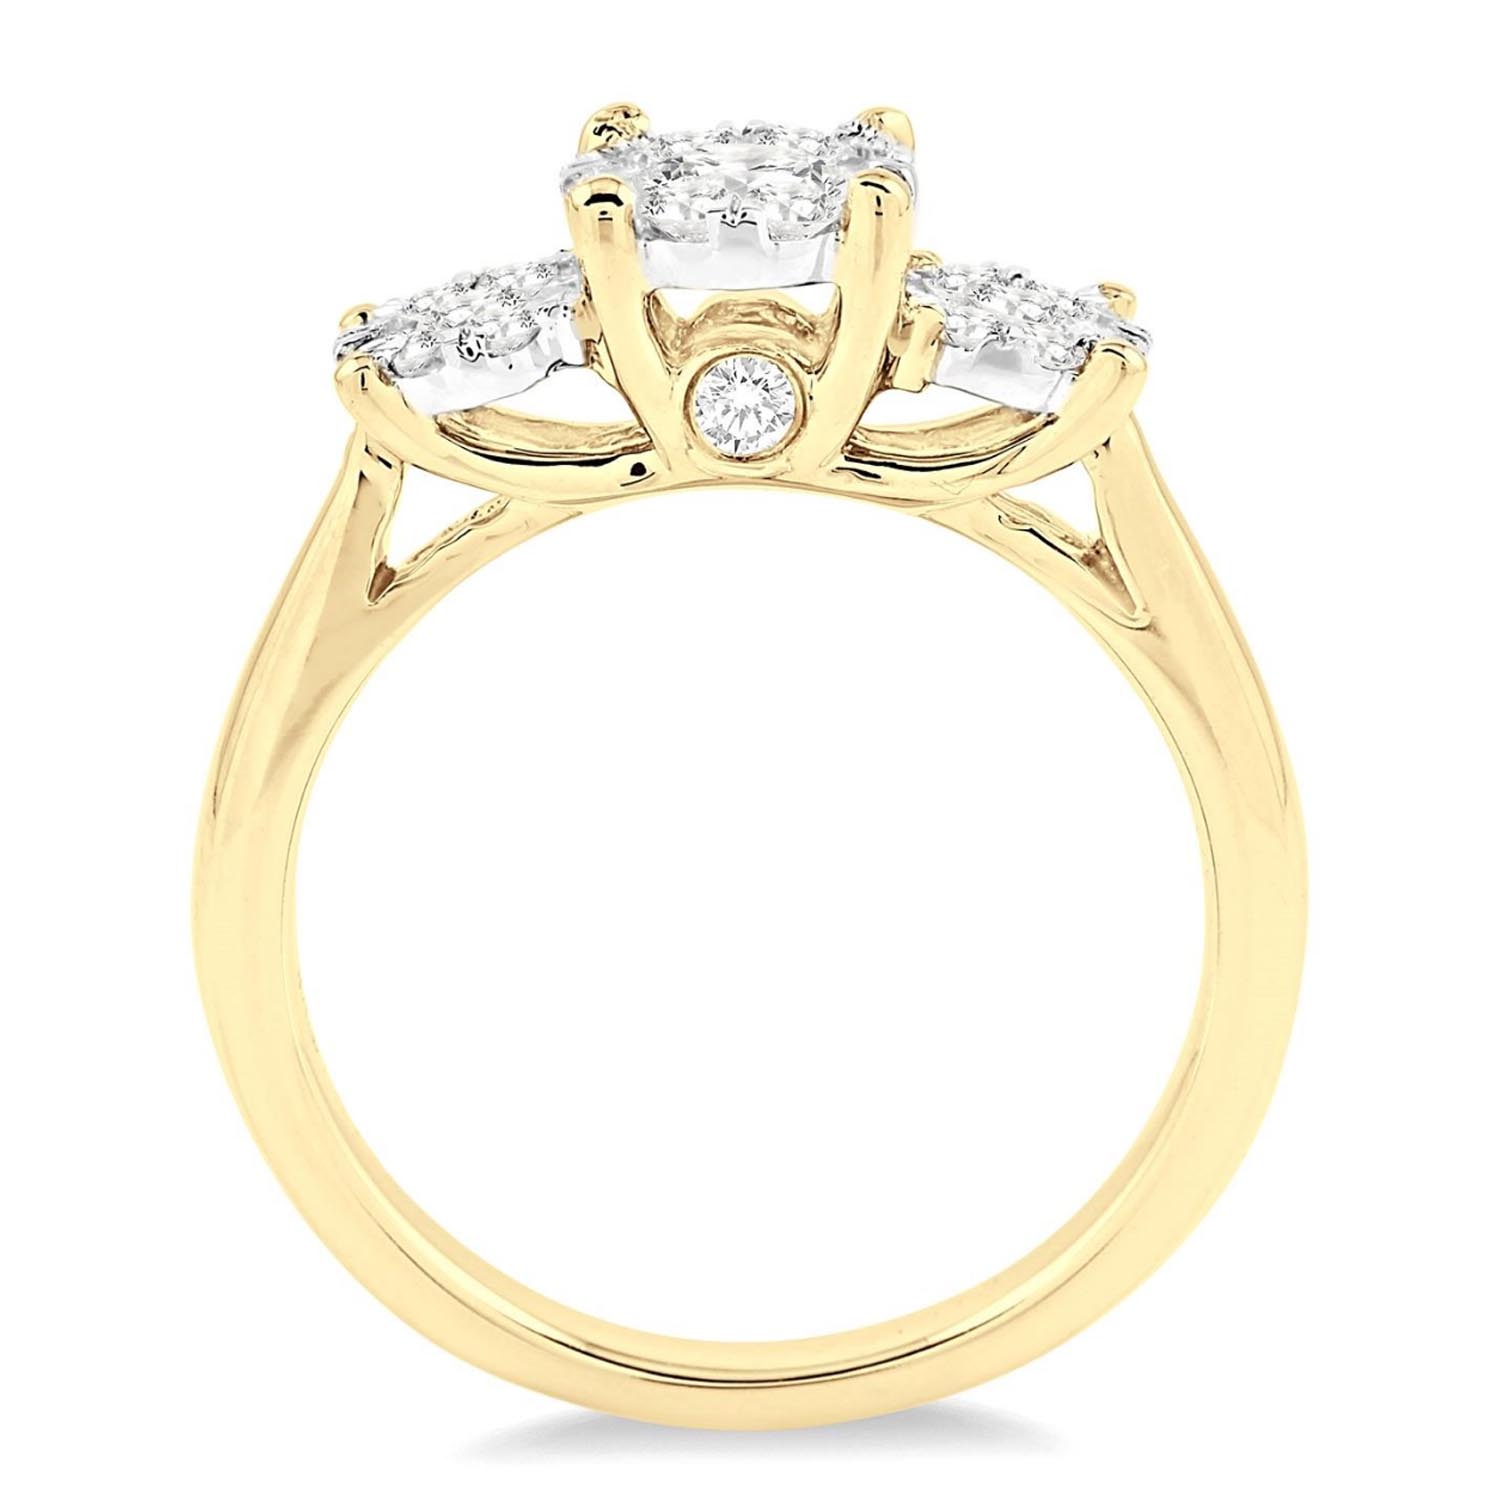 Lovebright Diamond Engagement Ring in 14kt Yellow Gold (1cttw)